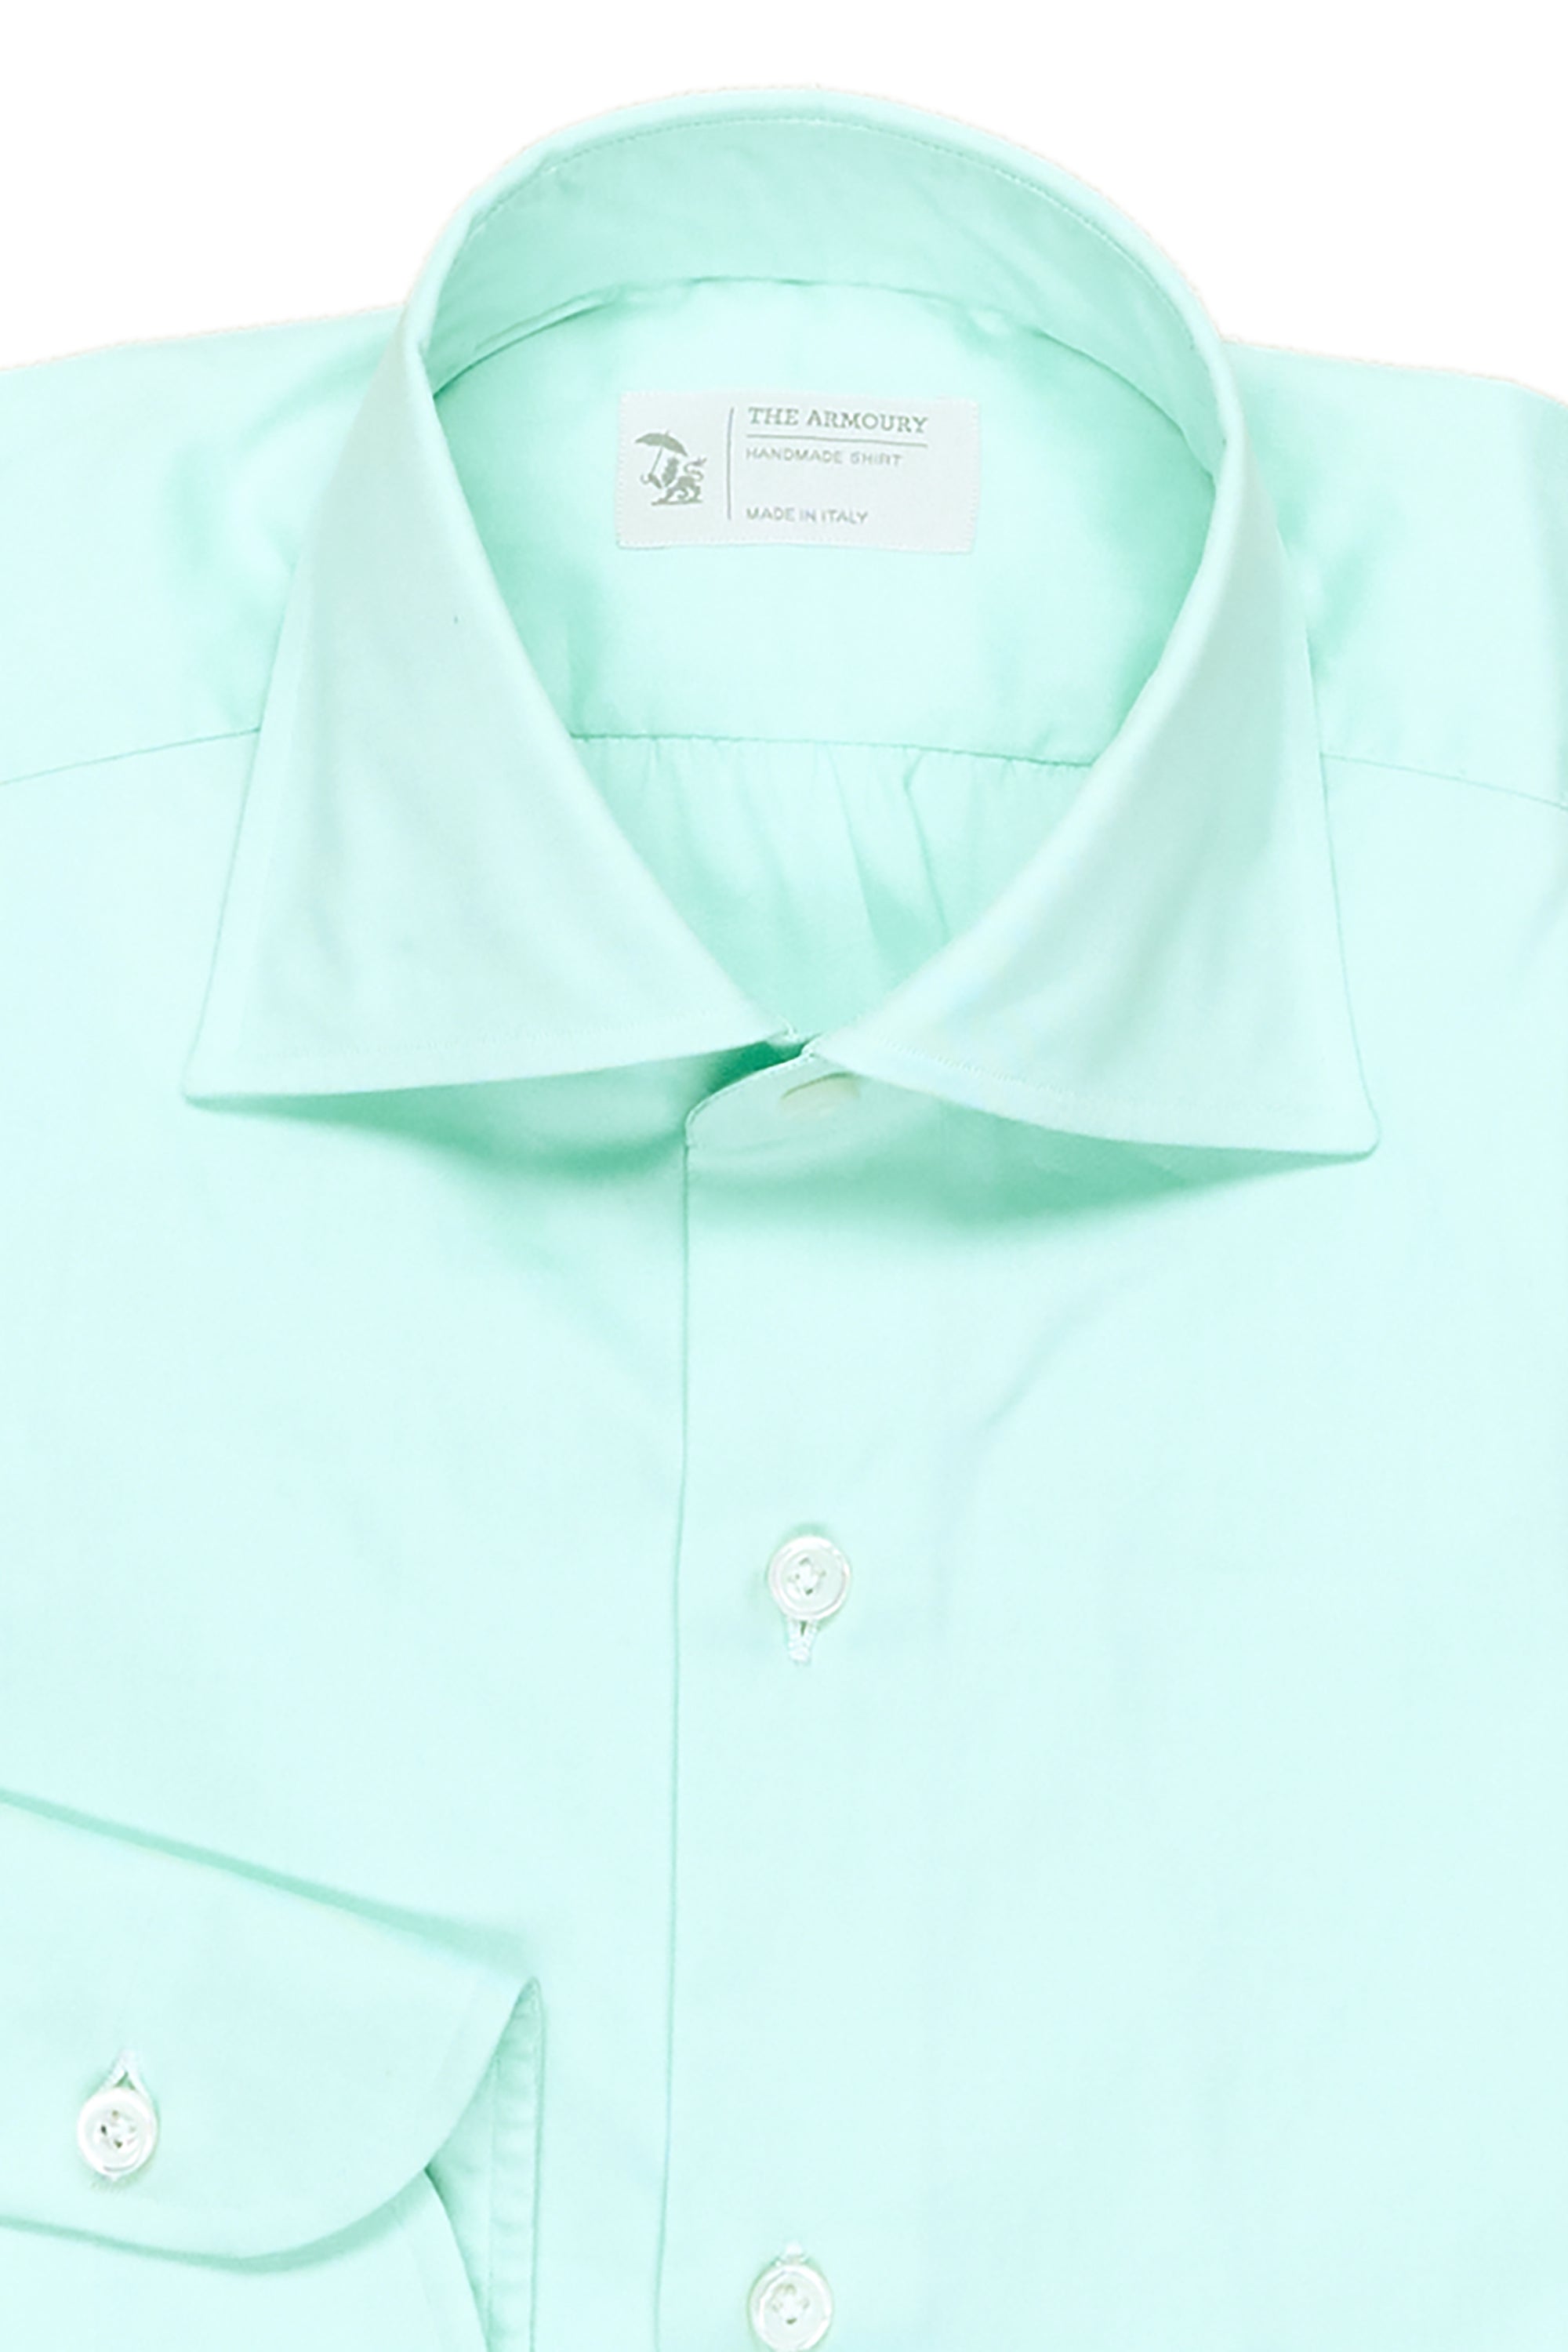 The Armoury Mint Green Cotton Oxford Spread Collar Shirt